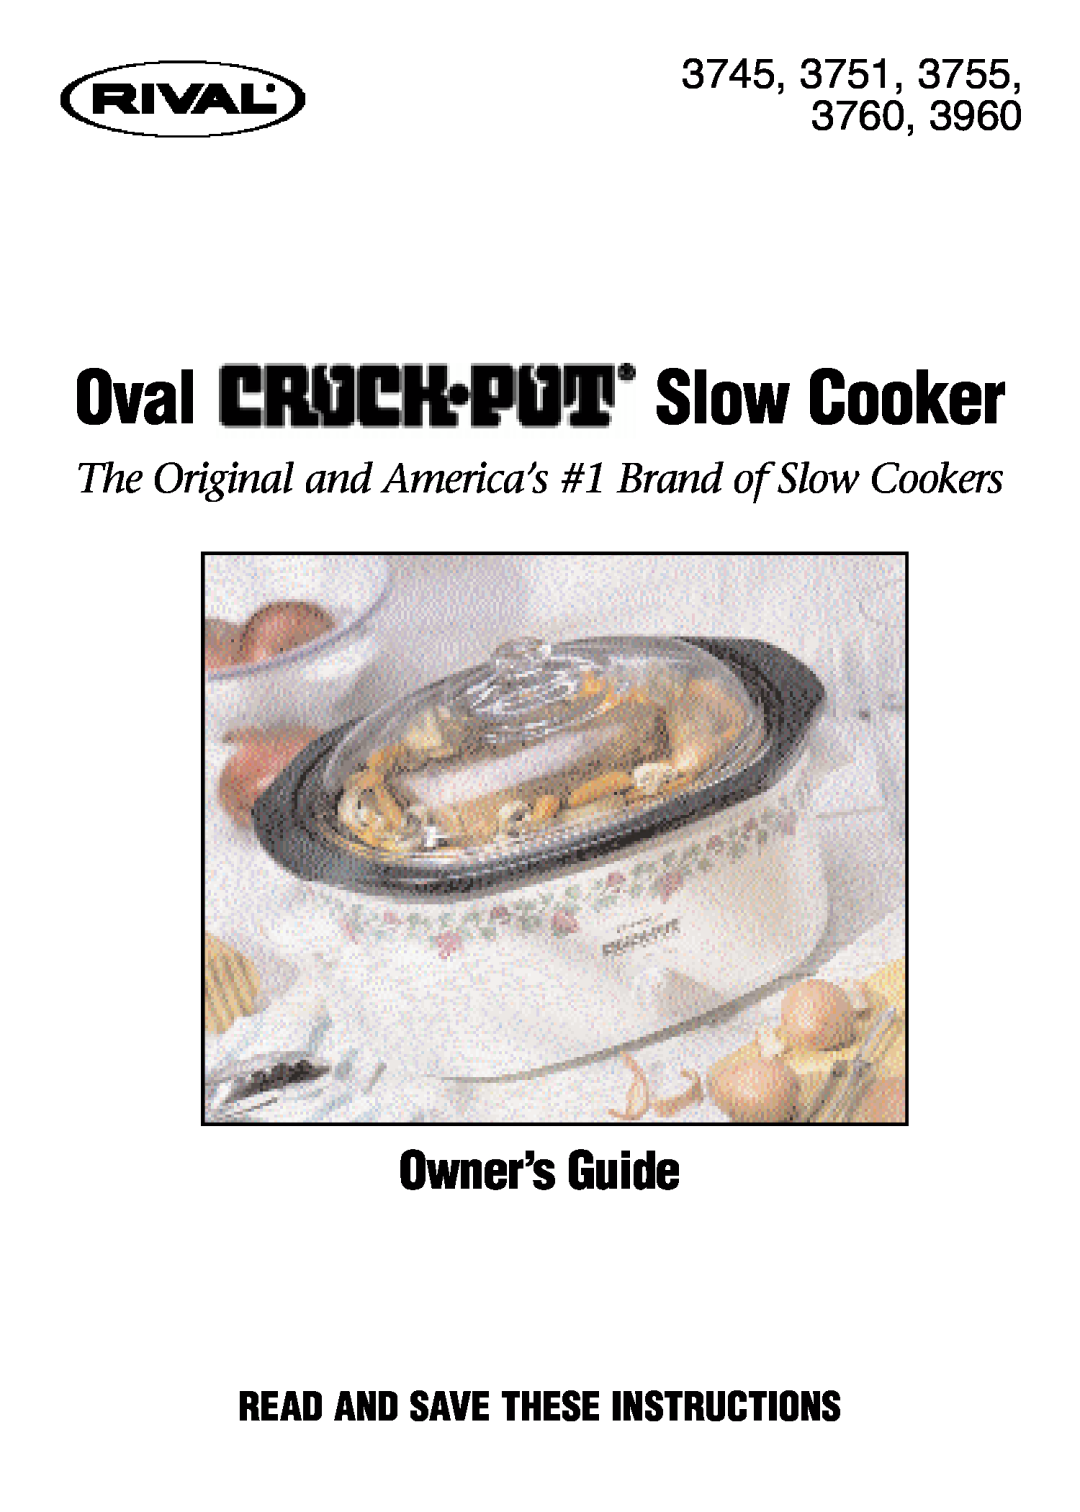 Rival 3745 manual Oval Slow Cooker, Owner’s Guide, Read And Save These Instructions 